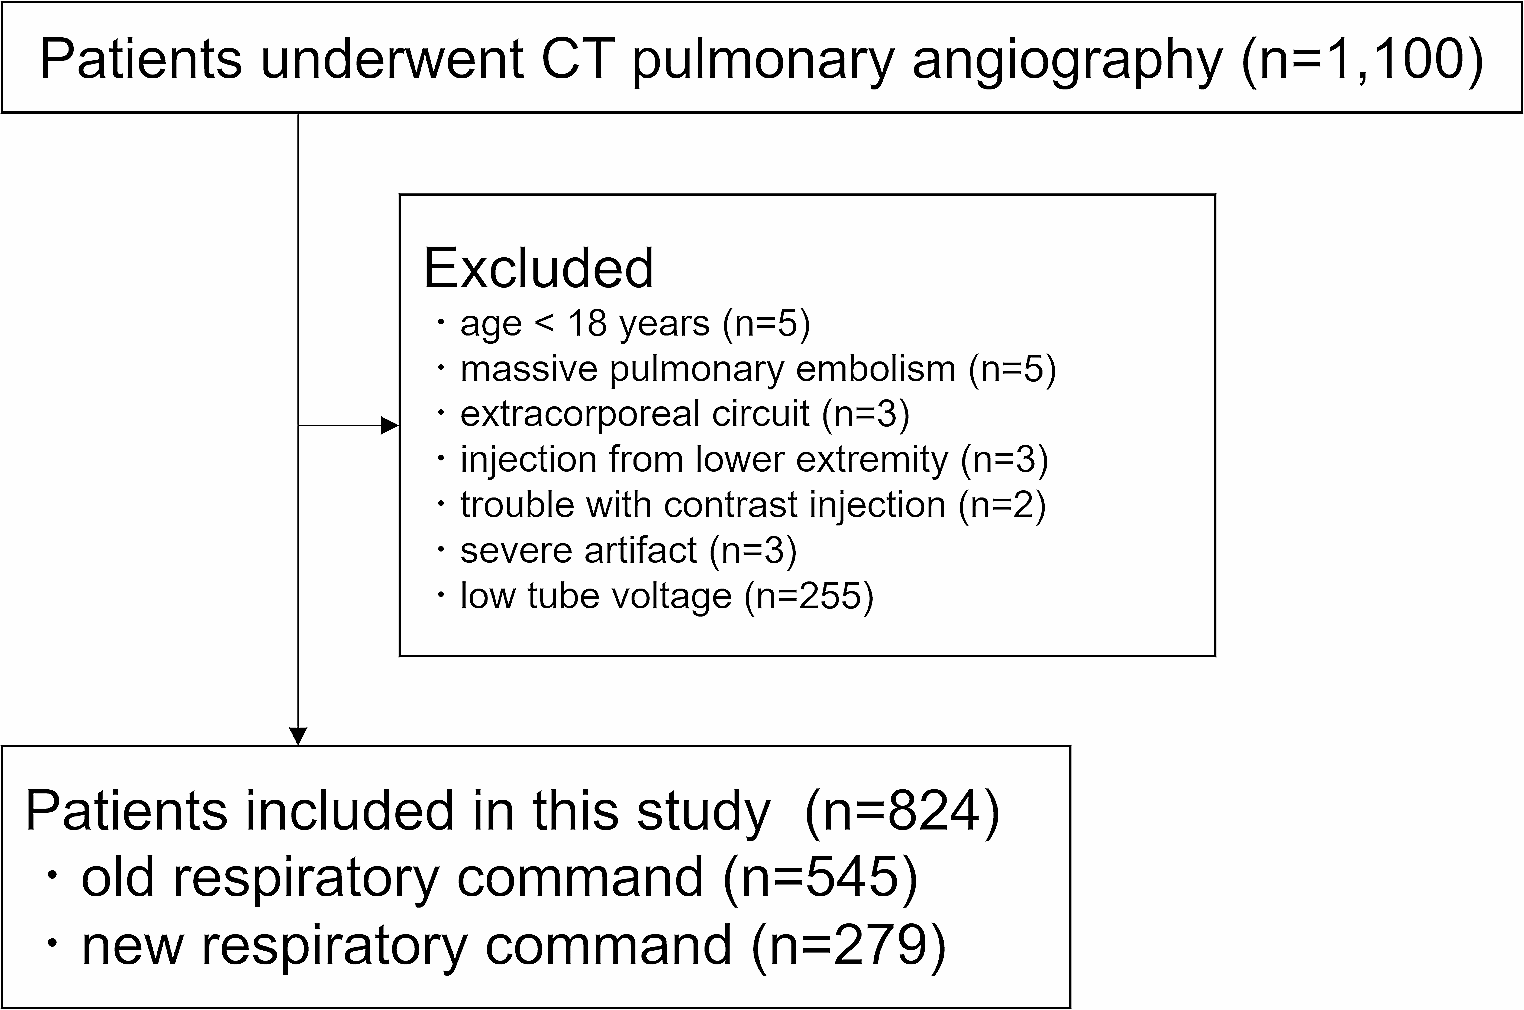 Transient interruption of contrast on CT pulmonary angiography: effect of mid-inspiratory vs. end-inspiratory respiration command